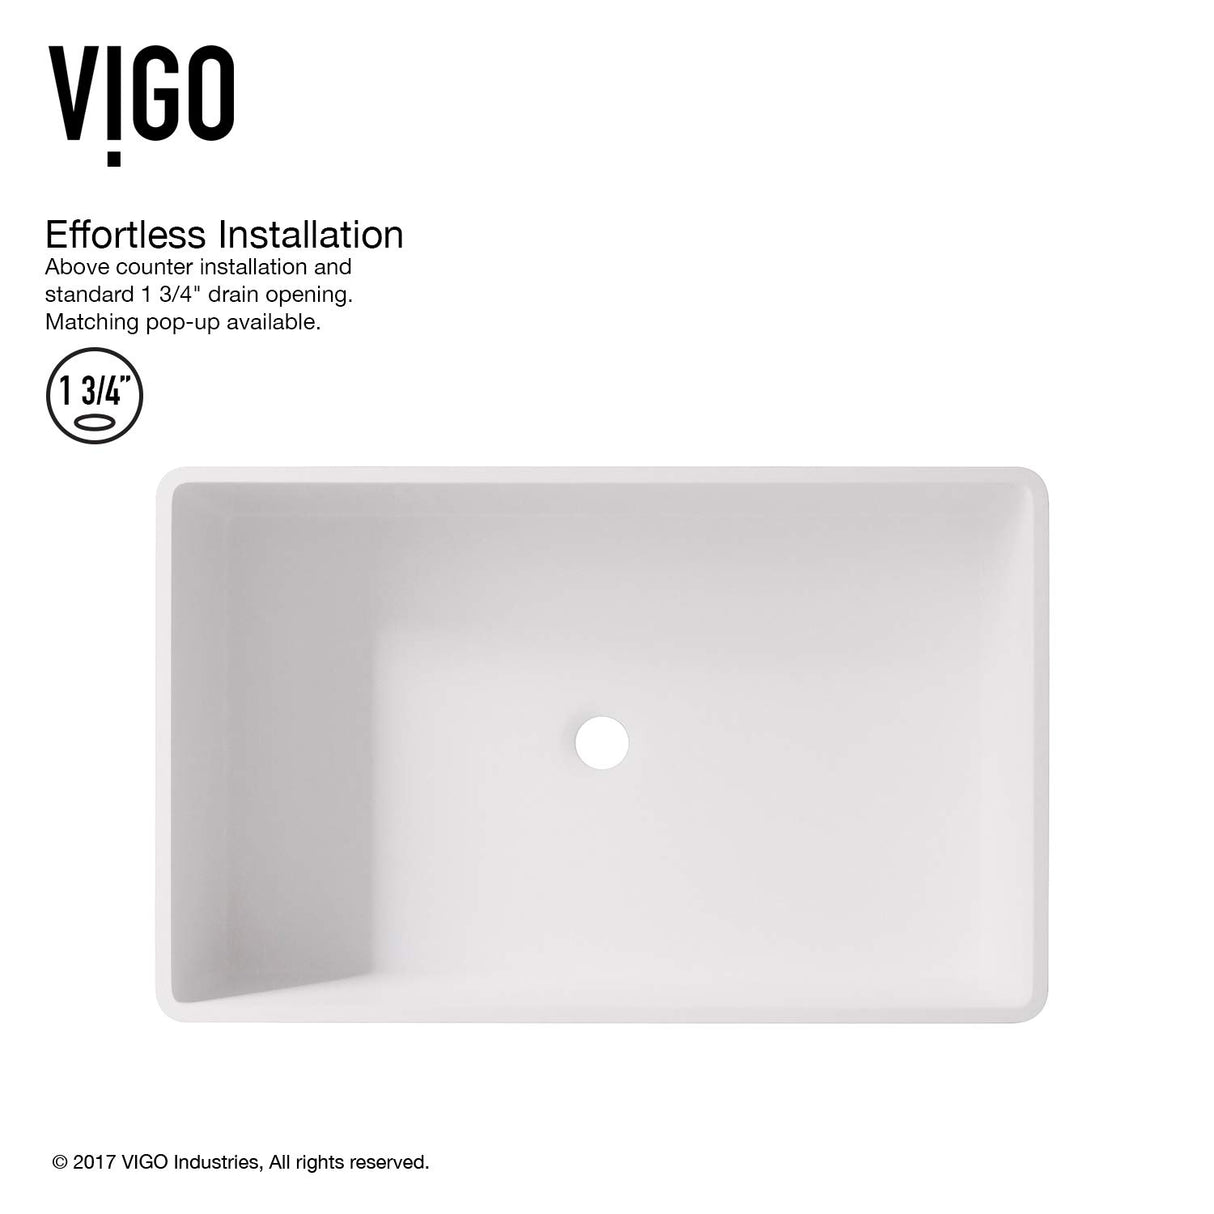 VIGO VGT1232 13.88" L -21.25" W -10.5" H Handmade Countertop White Matte Stone Rectangle Vessel Bathroom Sink Set in Matte White Finish with Chrome Single-Handle Waterfall Faucet and Pop Up Drain